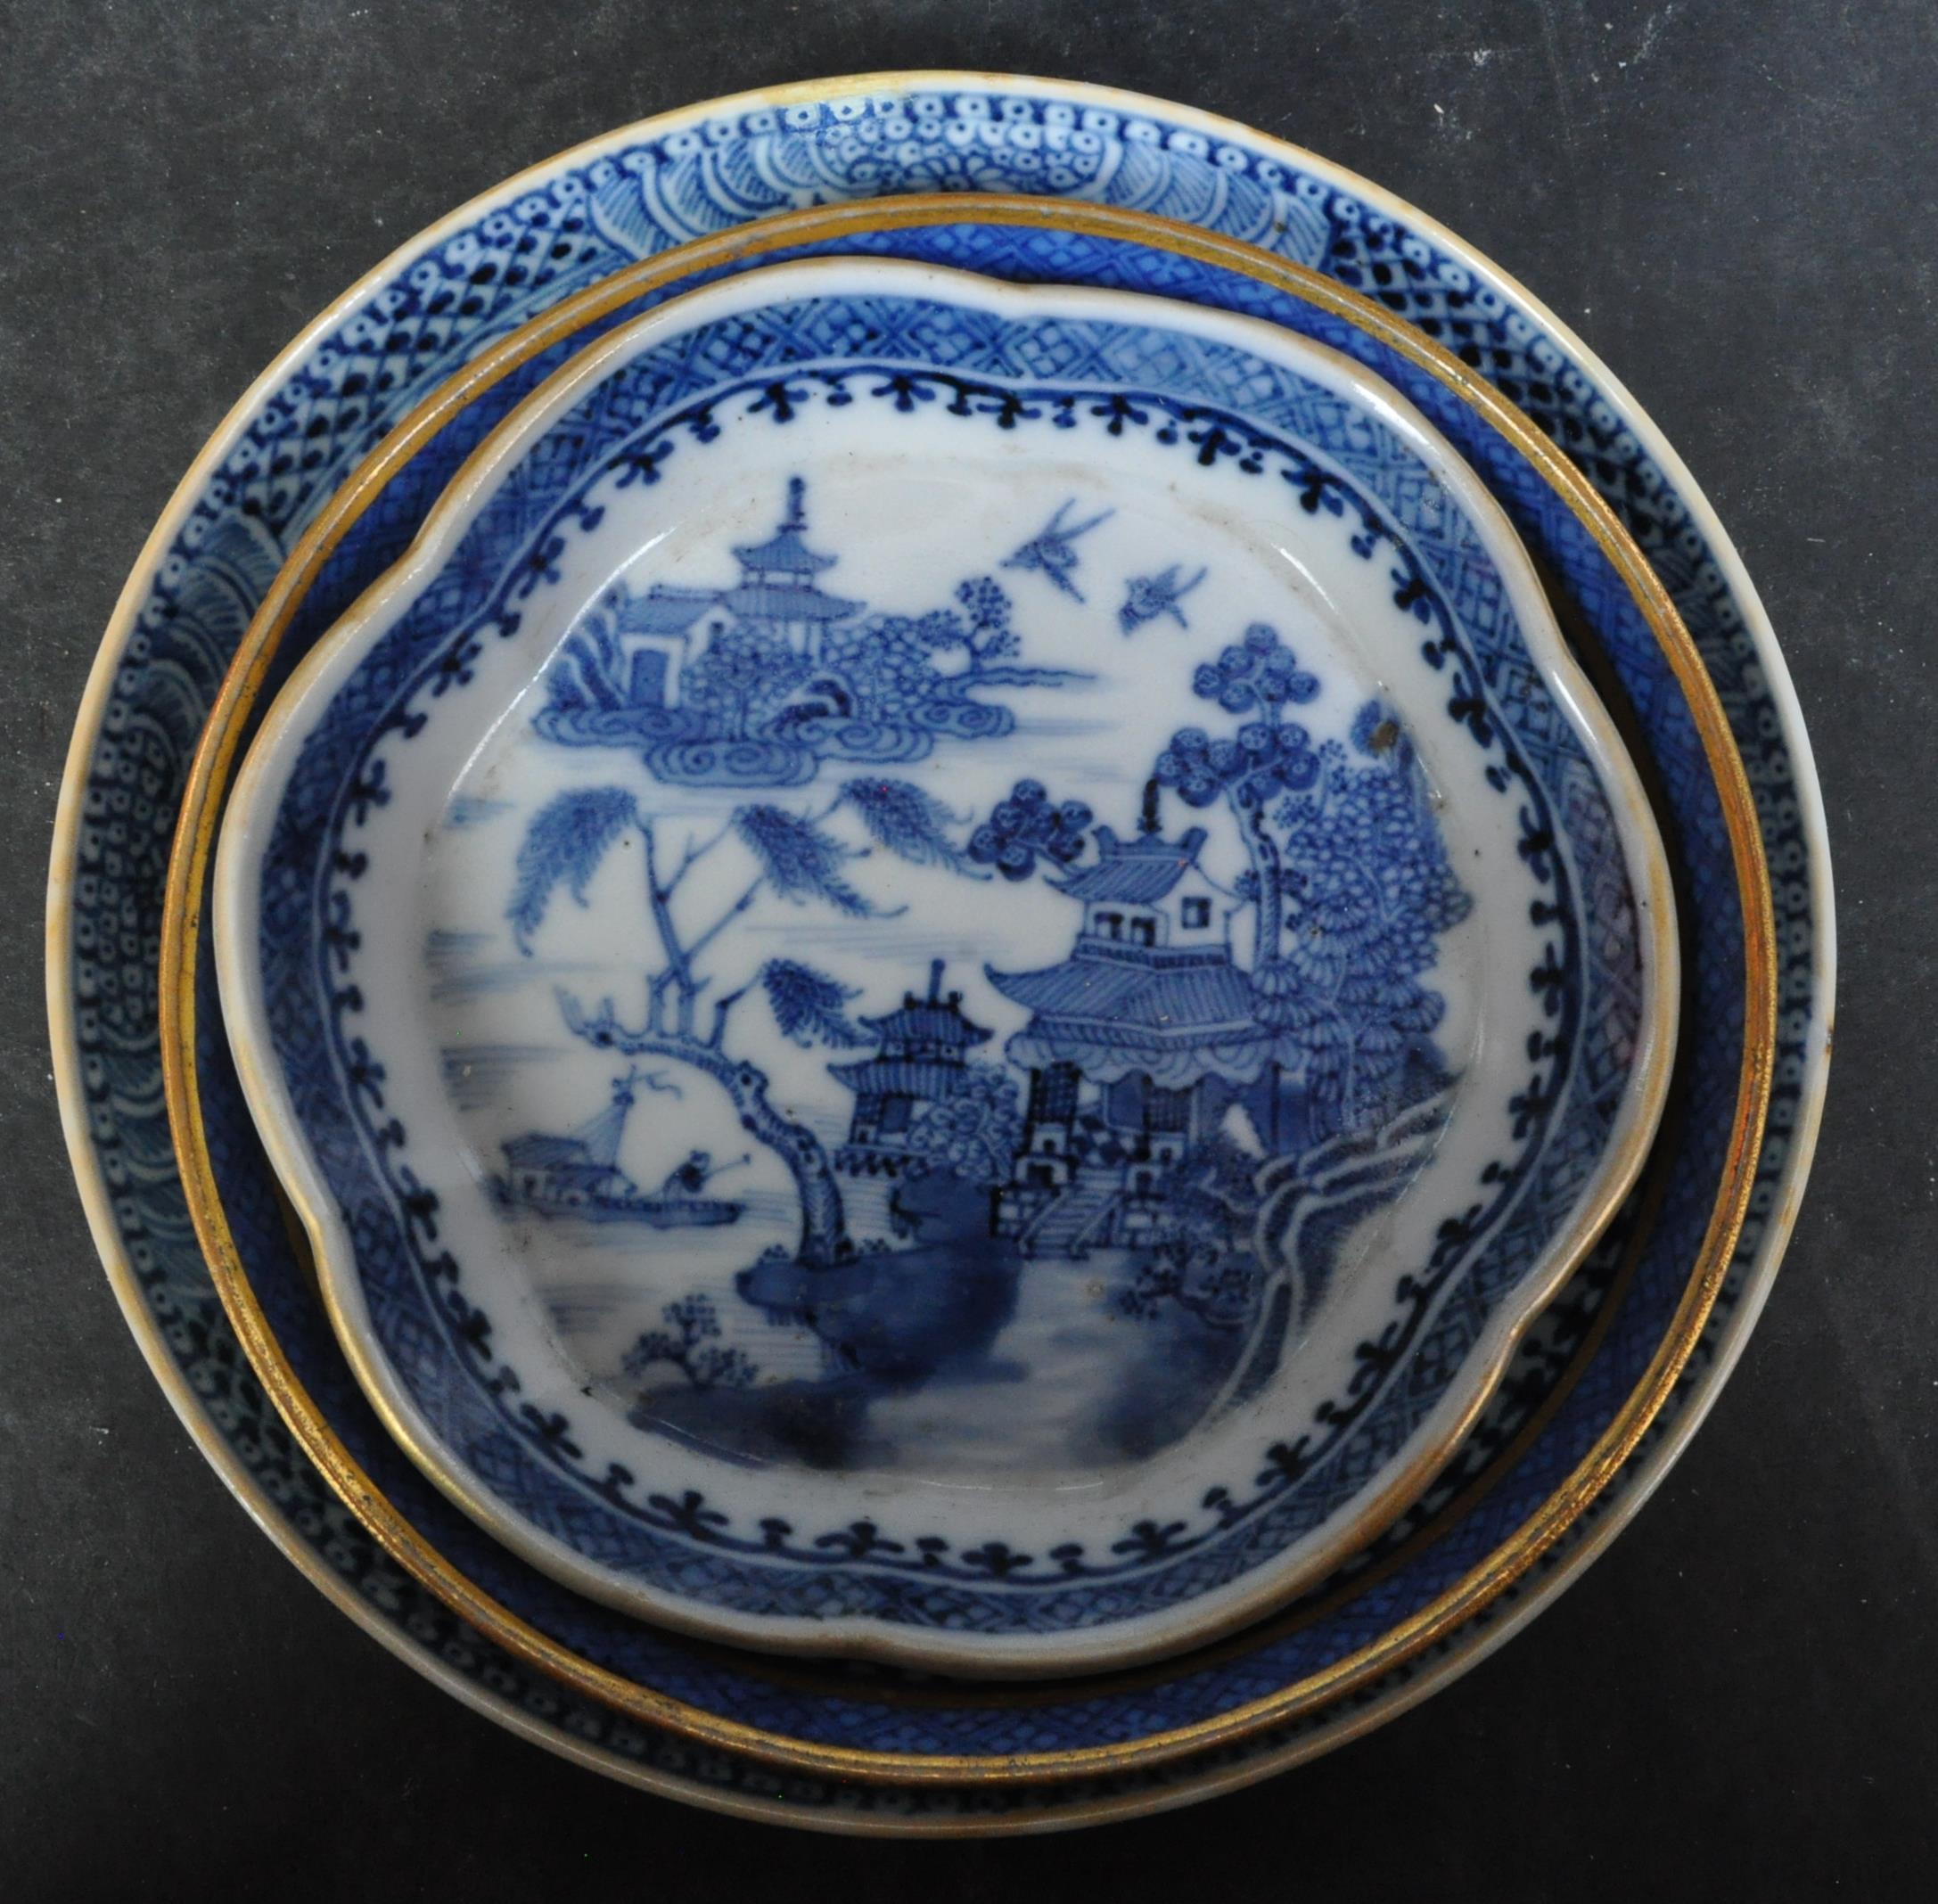 ASSORTMENT OF 18TH CENTURY CHINESE QIANLONG PORCELAIN ITEMS - Image 5 of 5